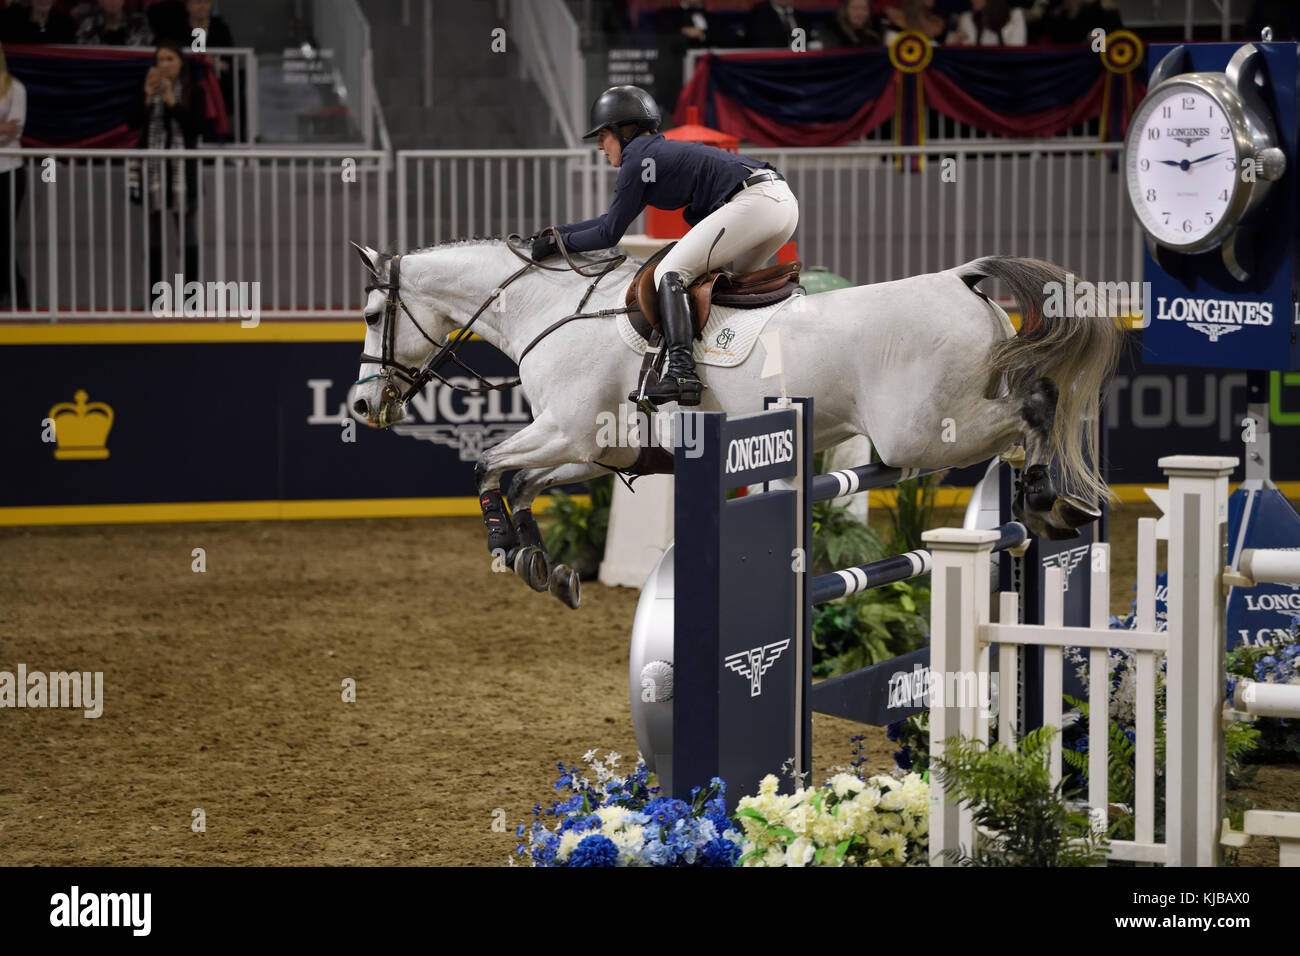 Kelli Cruciotti USA riding Hadja Van Orshof Serenity Farm in the Longines FEI World Cup Show Jumping competition at the Royal Horse Show Toronto Stock Photo